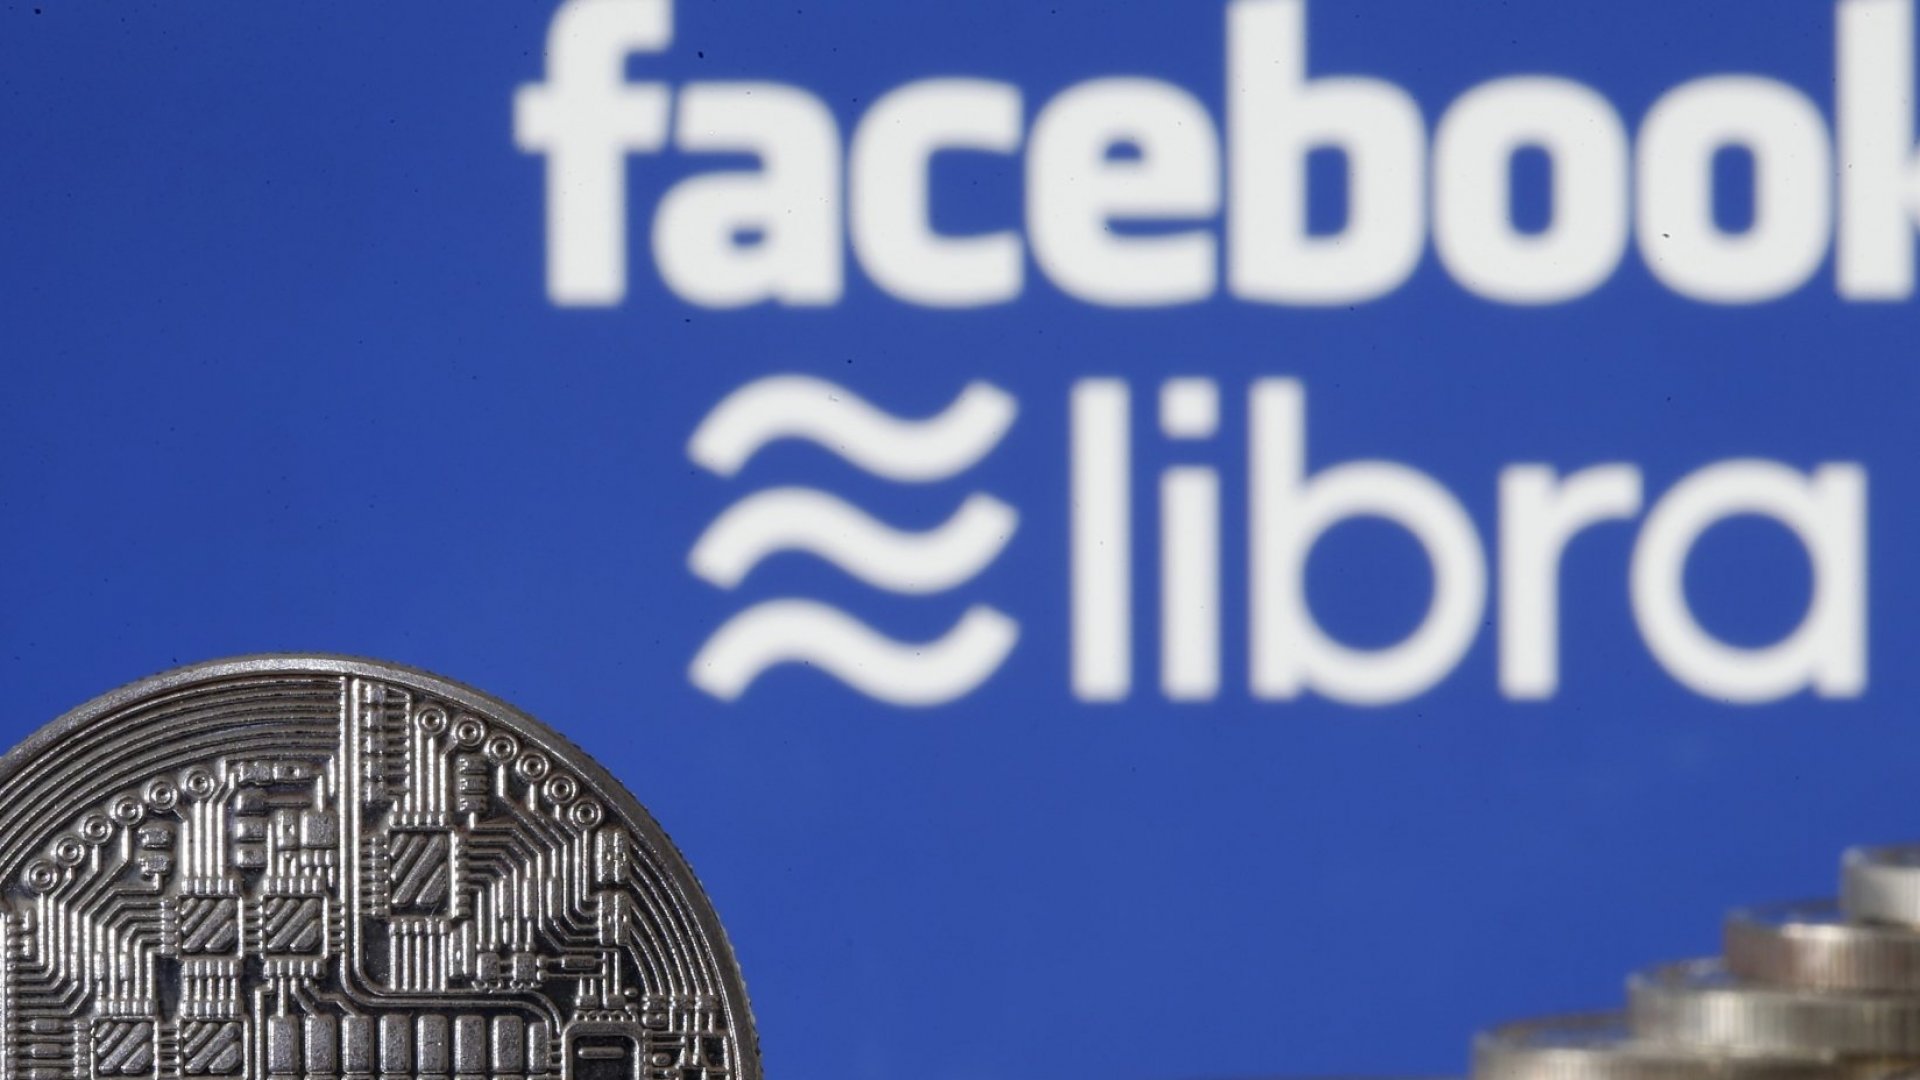 Buy Libra | How and where to buy the crypto of Facebook | CoinJournal